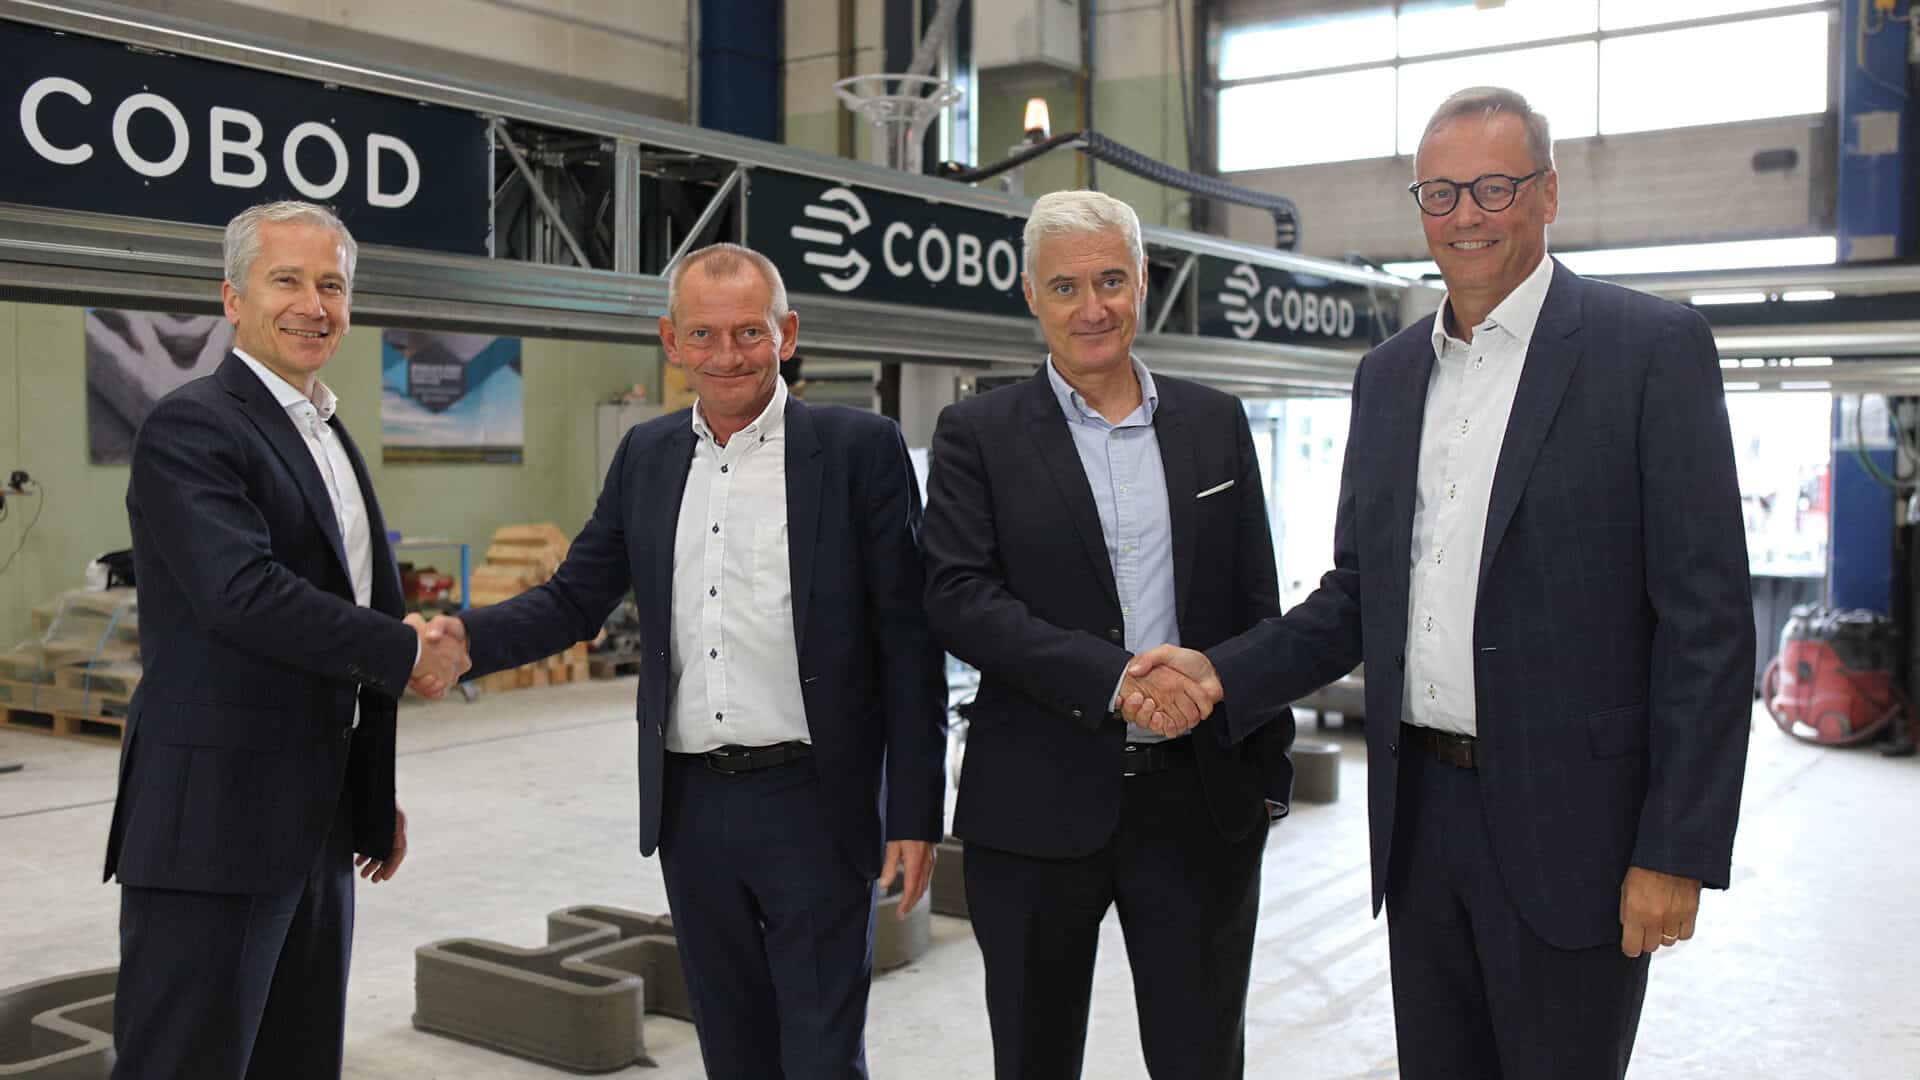 Executives from COBOD and Holcim shaking hands